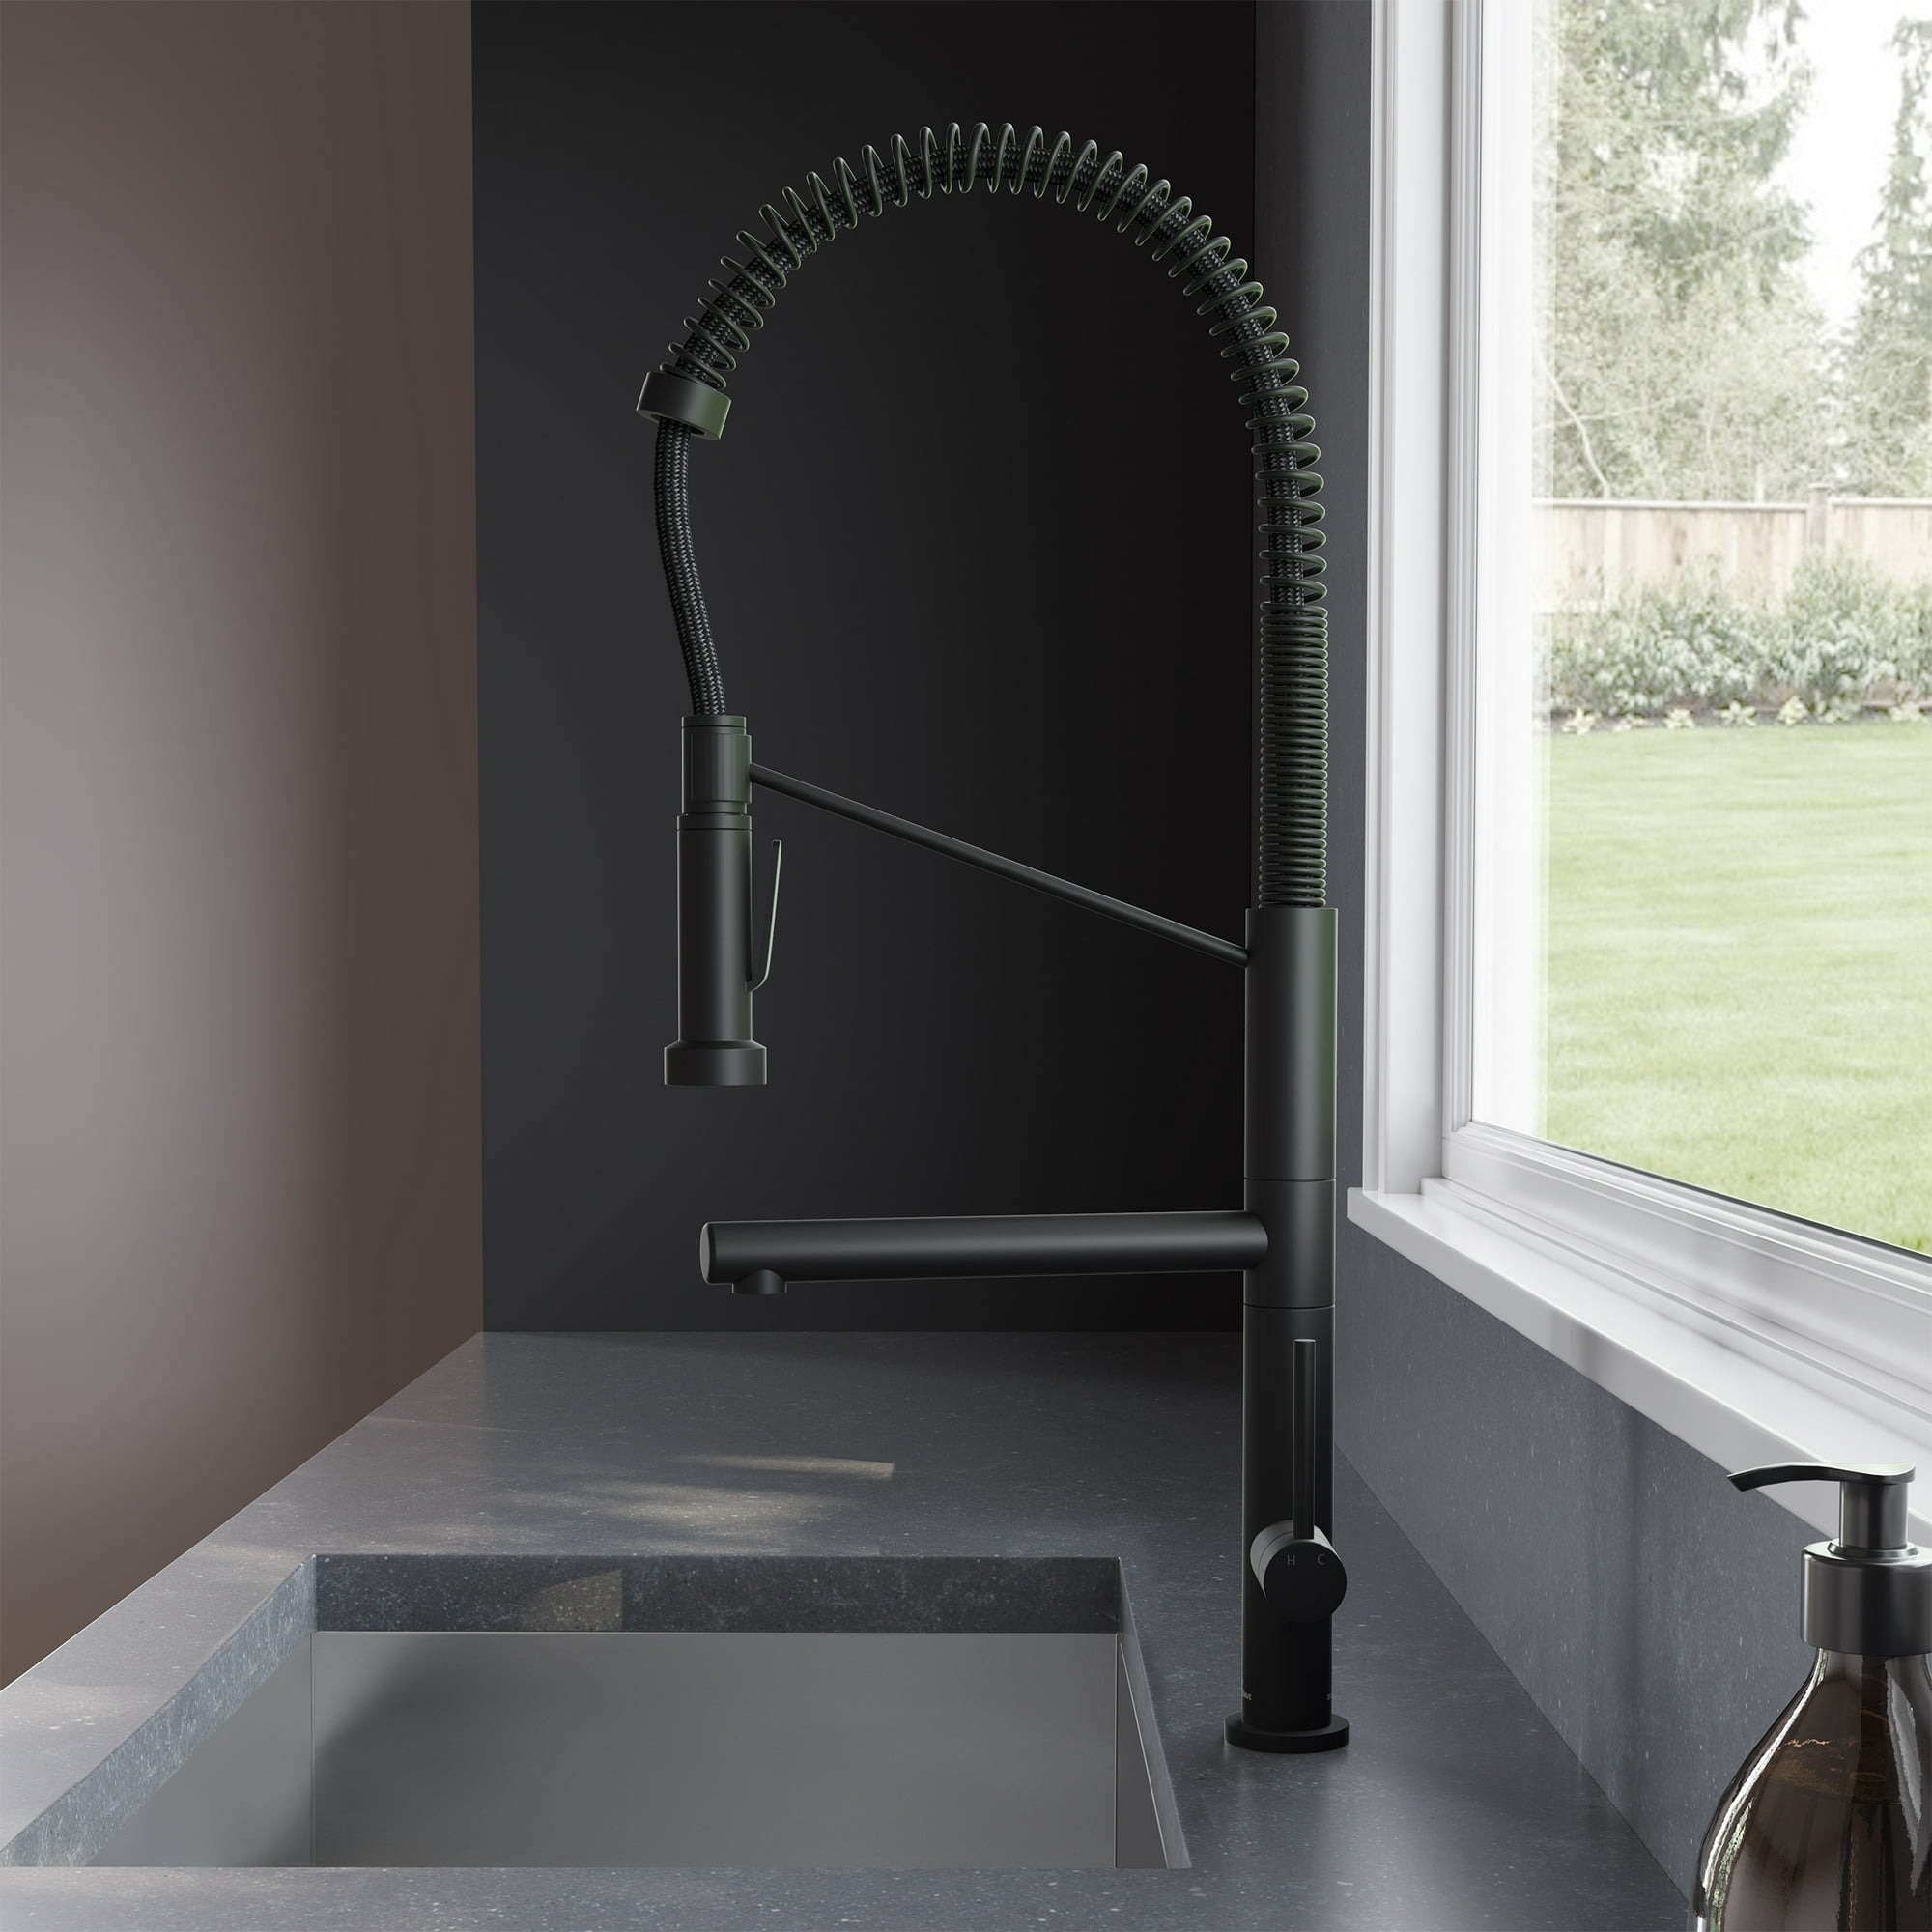 the black pull-down kitchen faucet